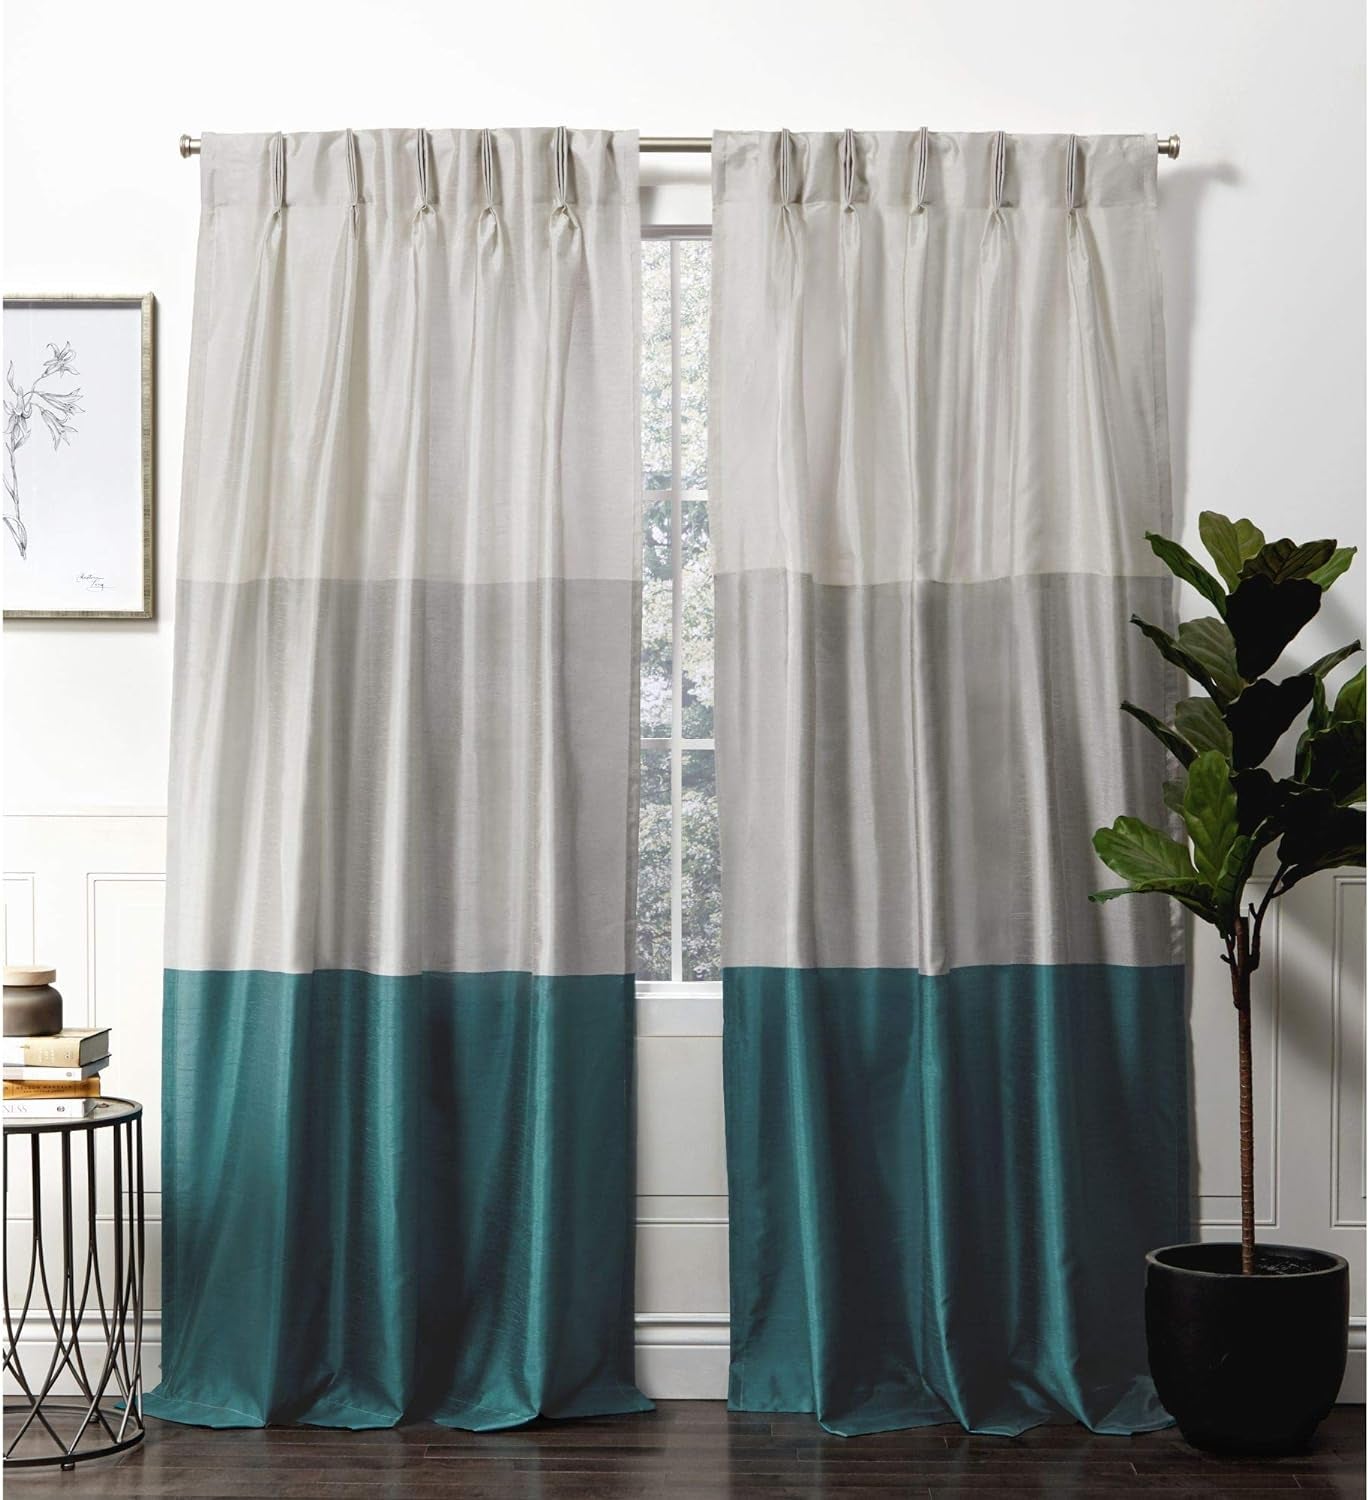 Exclusive Home Curtains Chateau Light Filtering Pinch Pleat Curtain Panels, 96" Length, Blush, Set of 2  Exclusive Home Curtains Teal 27X96 